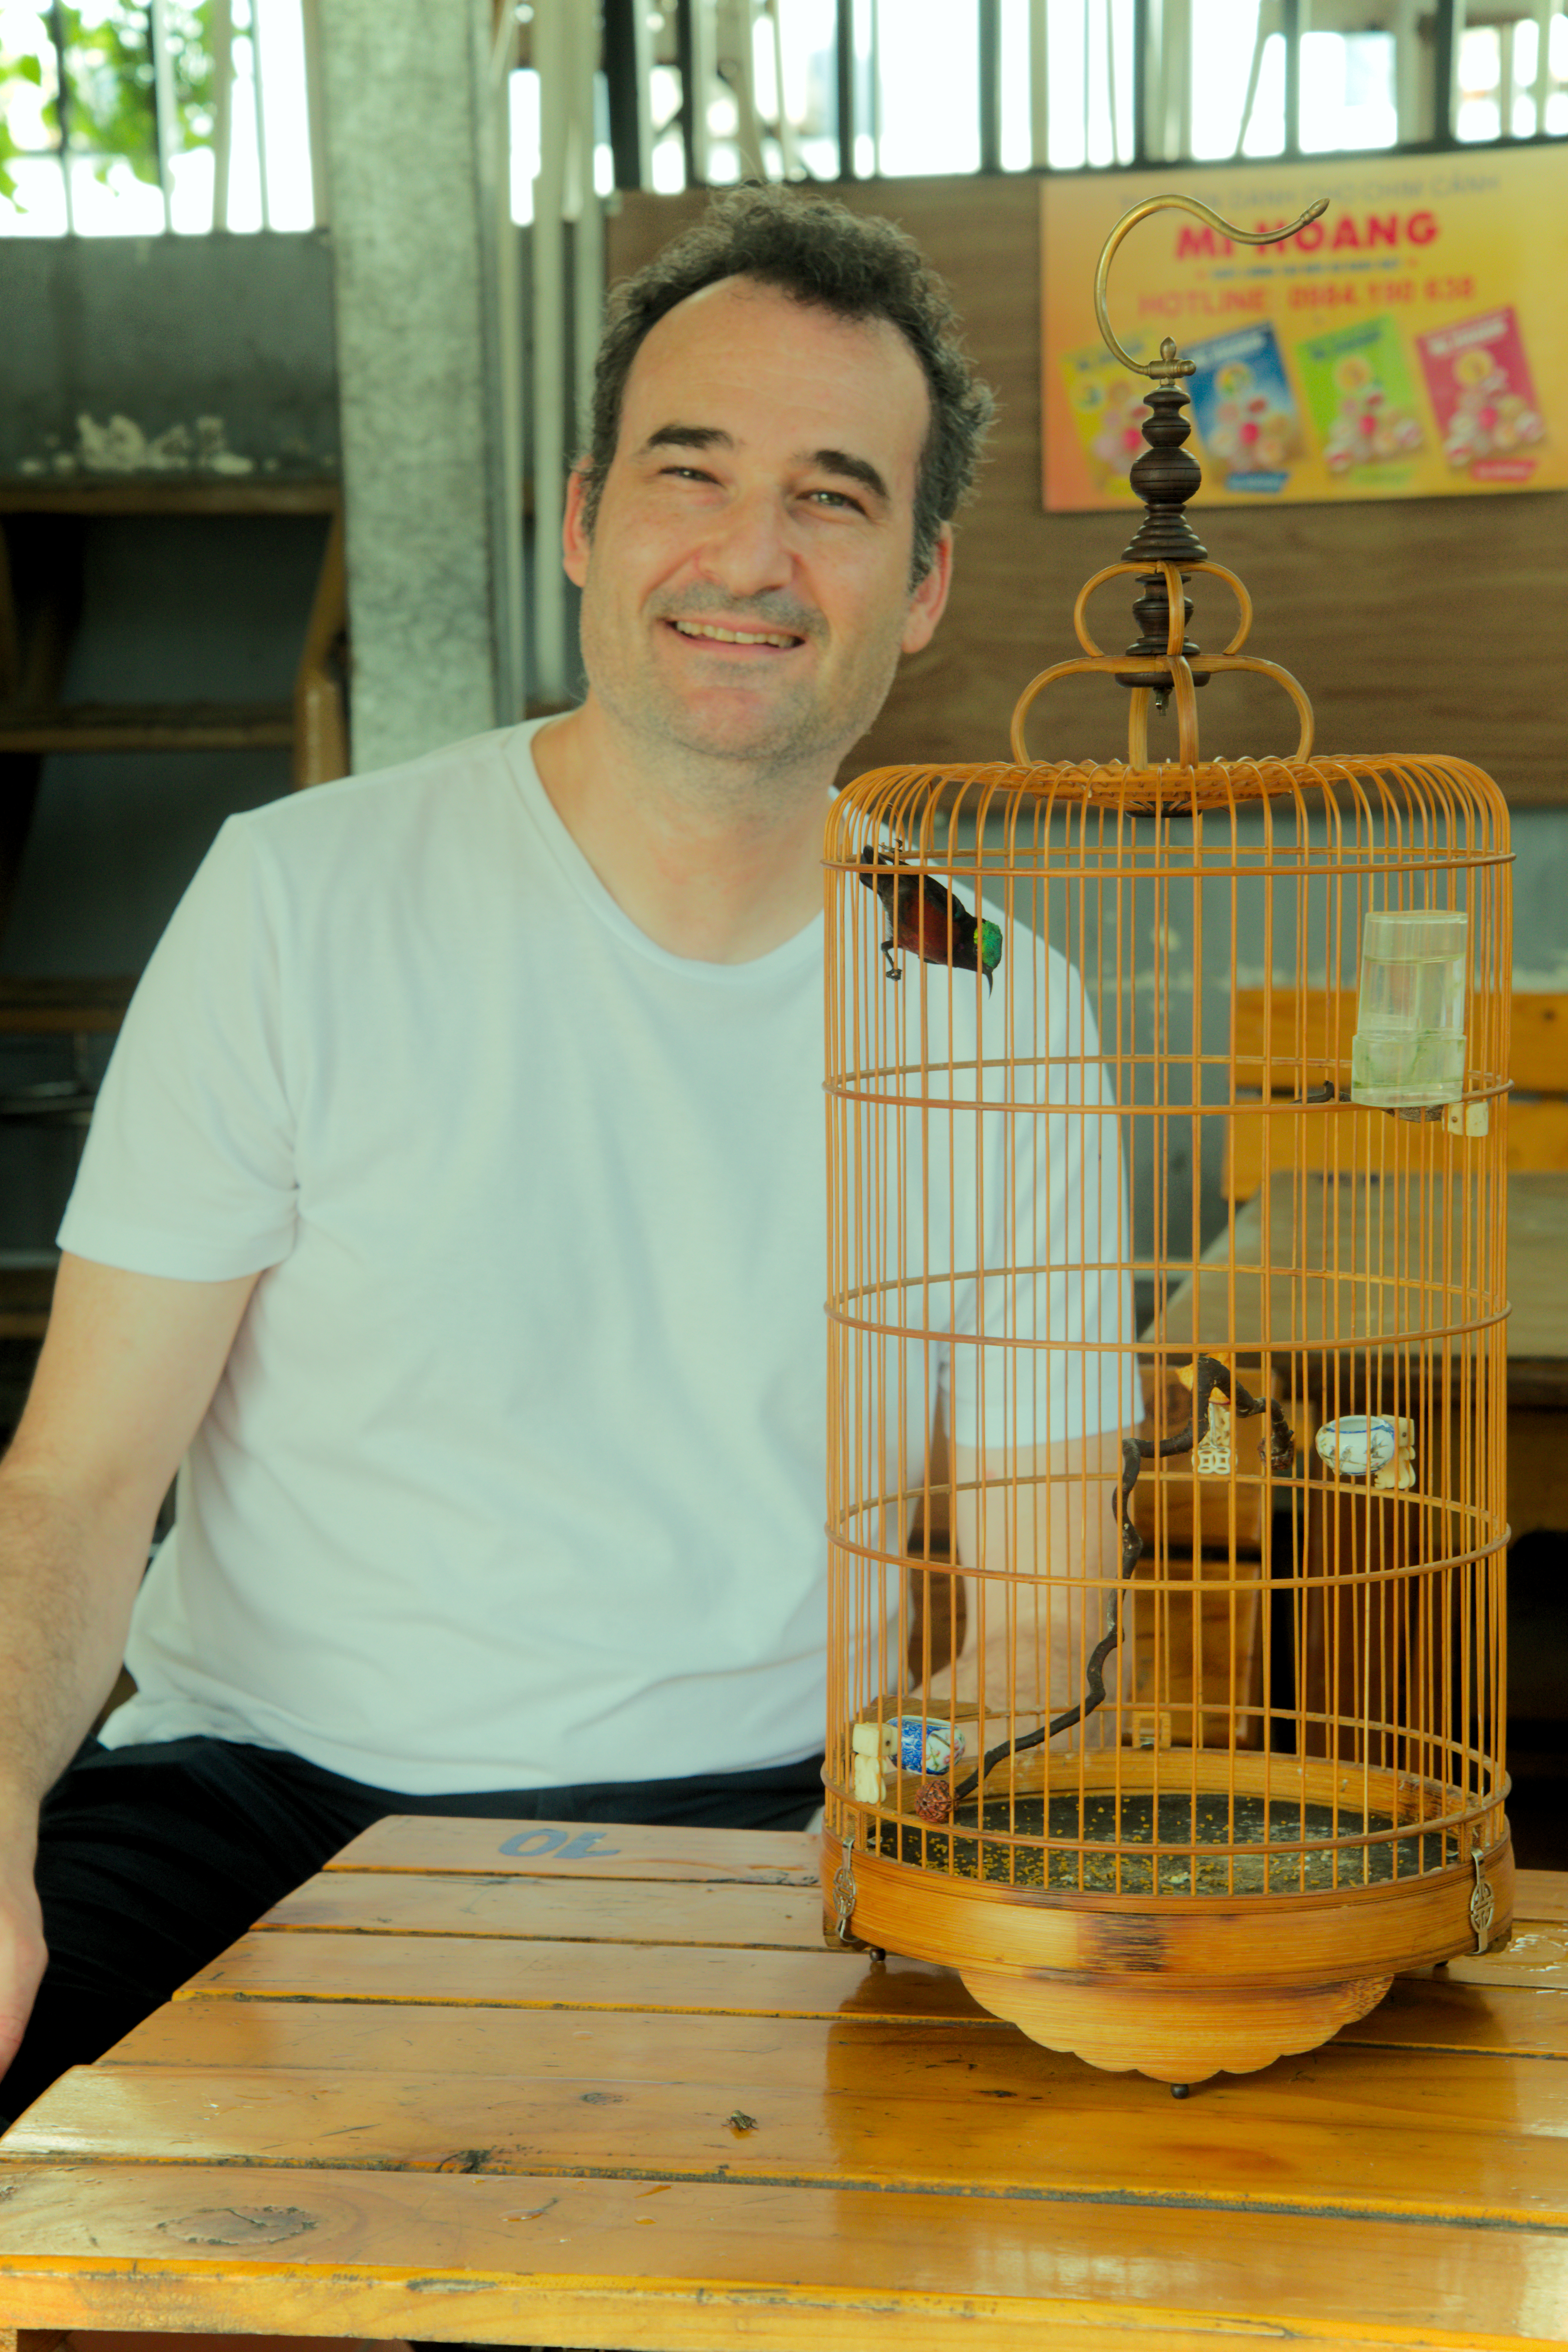 Kyle Nunas is seen in a photo he provided Tuoi Tre News showing him during his visit to a bird cafe near Tao Dan Street in Ho Chi Minh City's District 1.